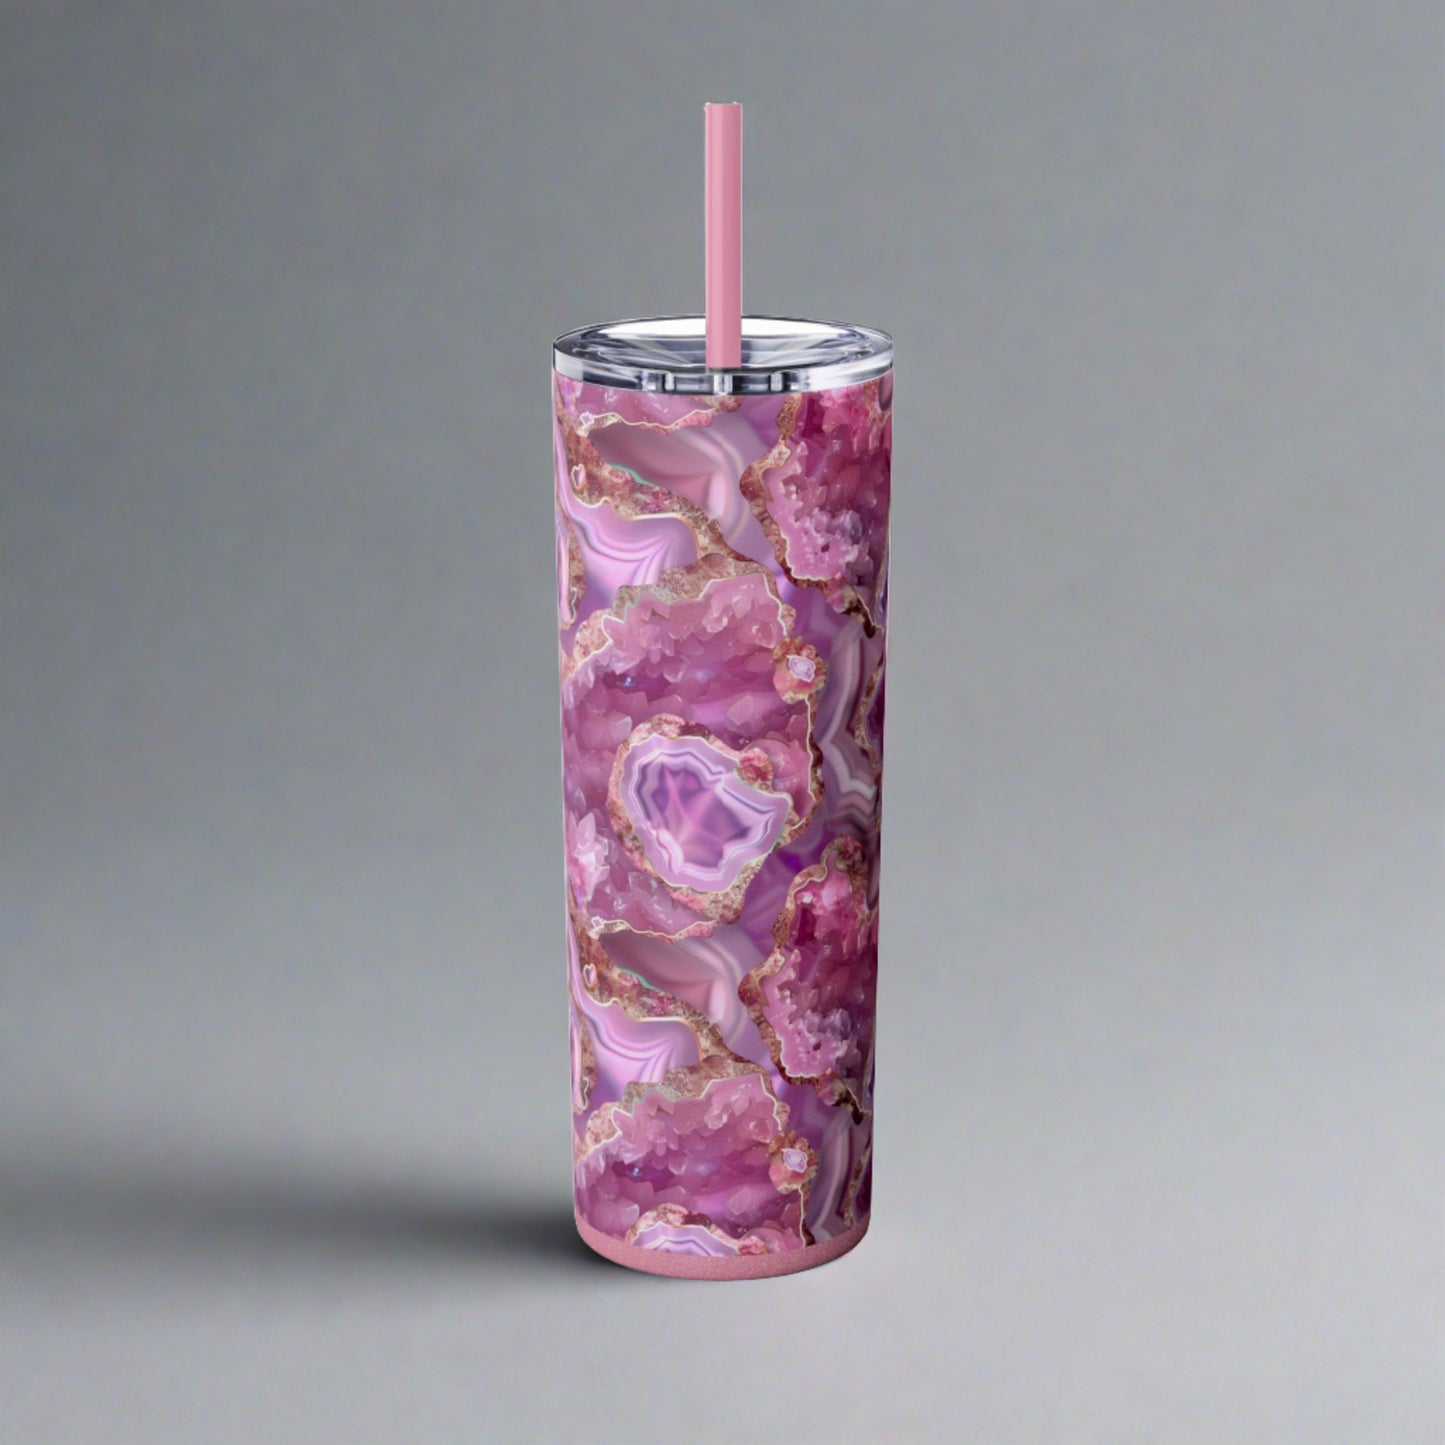 Stainless Steel Tumbler with Lid & Straw, 20 oz, Pink Quartz Geode  - Double-walled, Keeps Drinks Hot or Cold